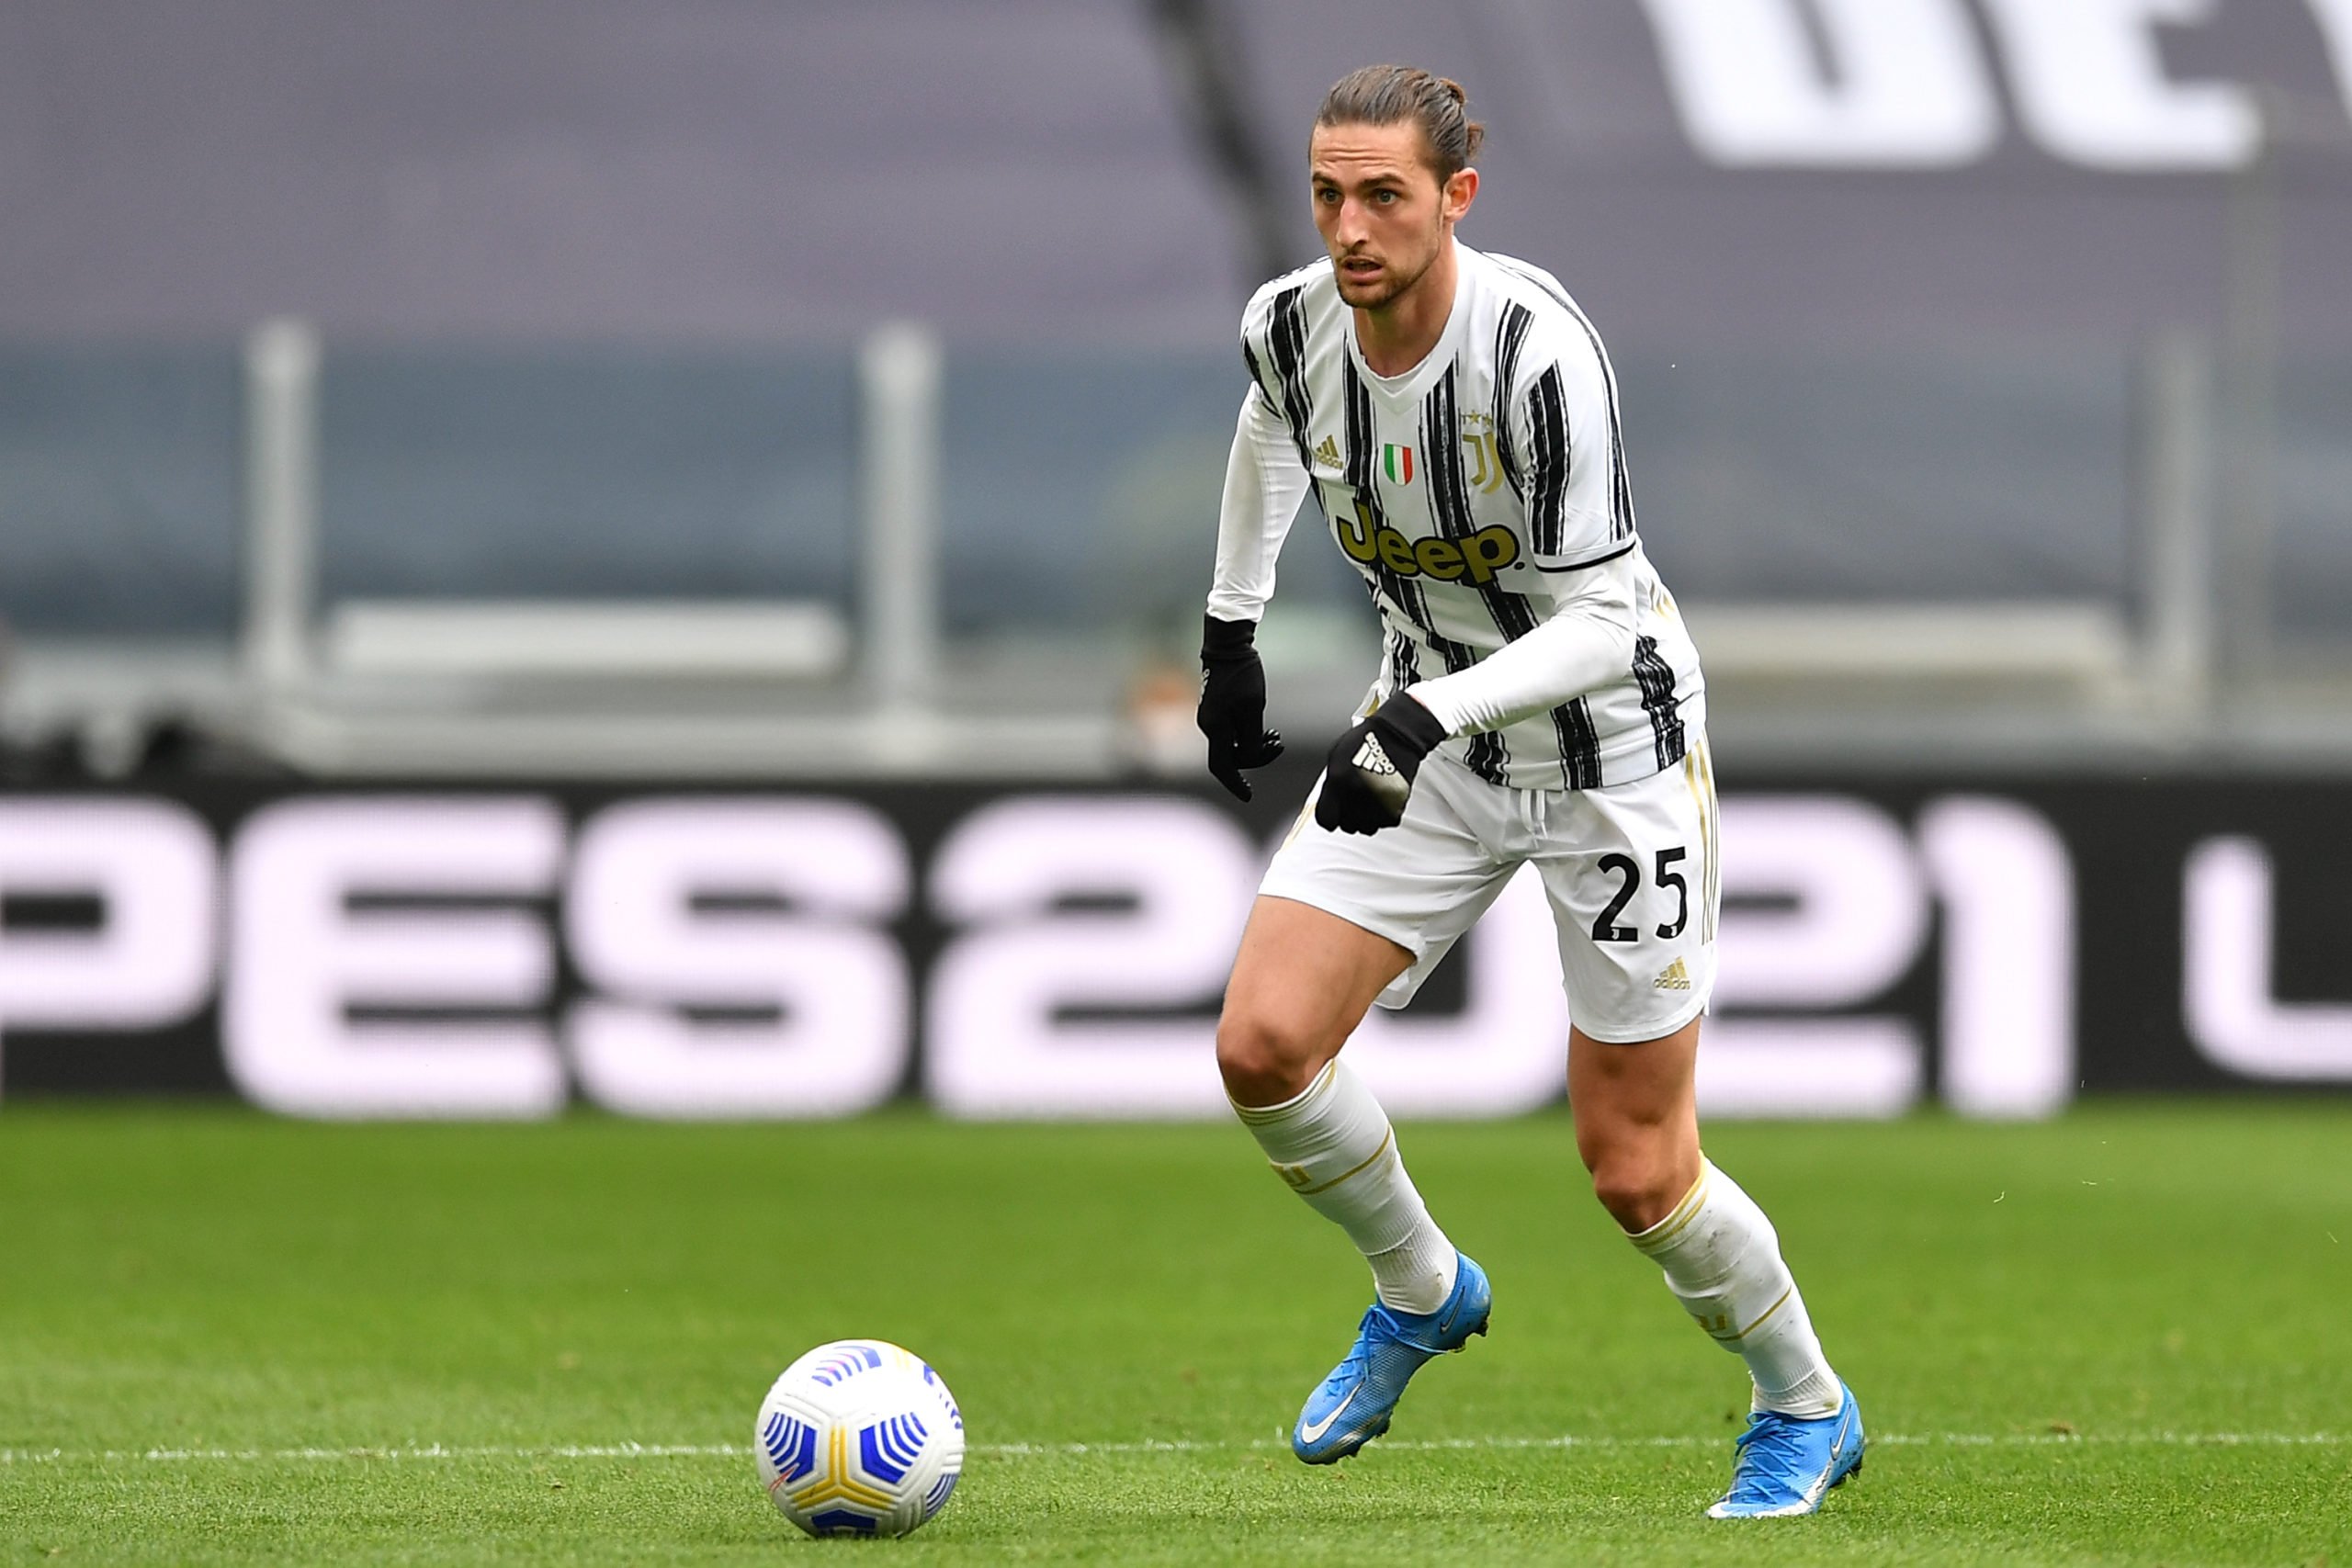 TURIN, ITALY - APRIL 11:  Adrien Rabiot of Juventus in action during the Serie A match between Juventus and Genoa CFC at Allianz Stadium on April 11, 2021 in Turin, Italy.  (Photo by Valerio Pennicino/Getty Images)The 4th Official uses images provided by the following image agency: Getty Images (https://www.gettyimages.de/) Imago Images (https://www.imago-images.de/)